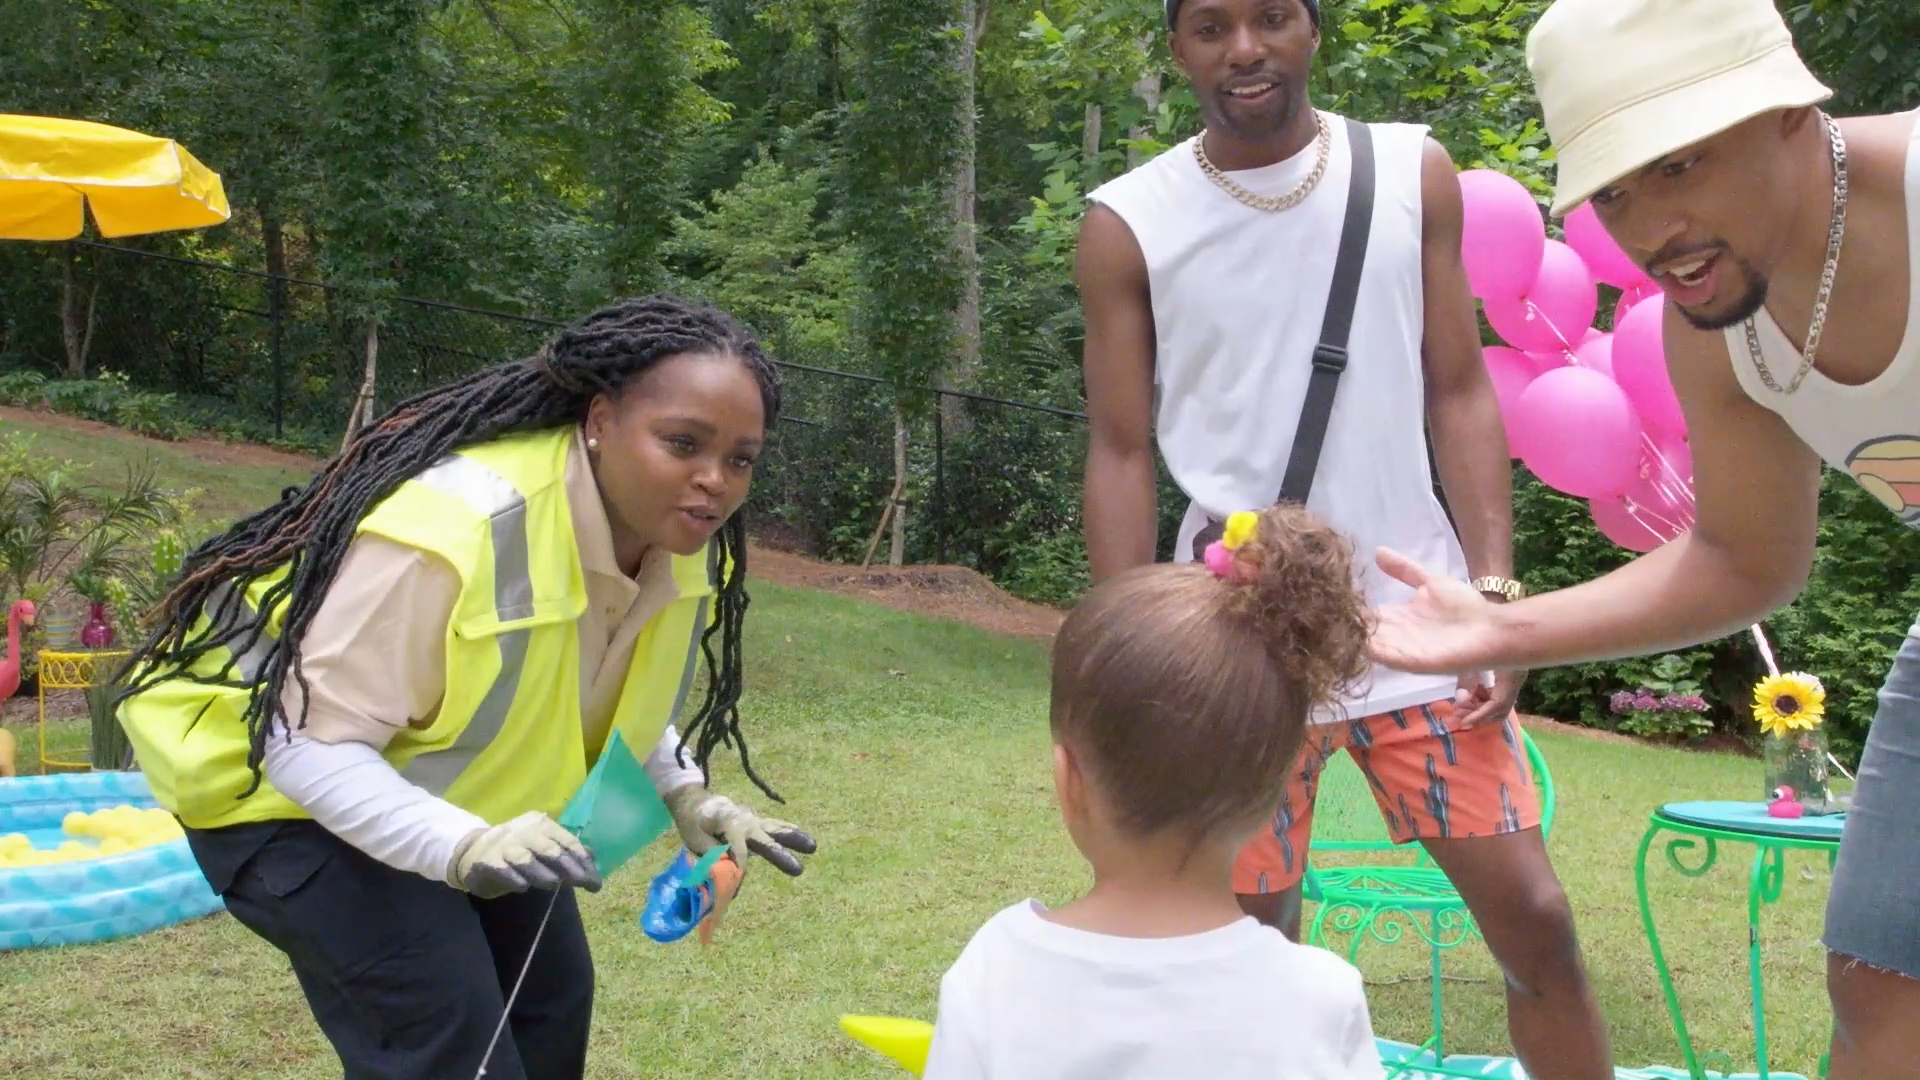 Southern Company Gas' remixed 'No Diggity' music video, featuring influencer family Terell and Jarius Joseph for Safe Digging Awareness month.